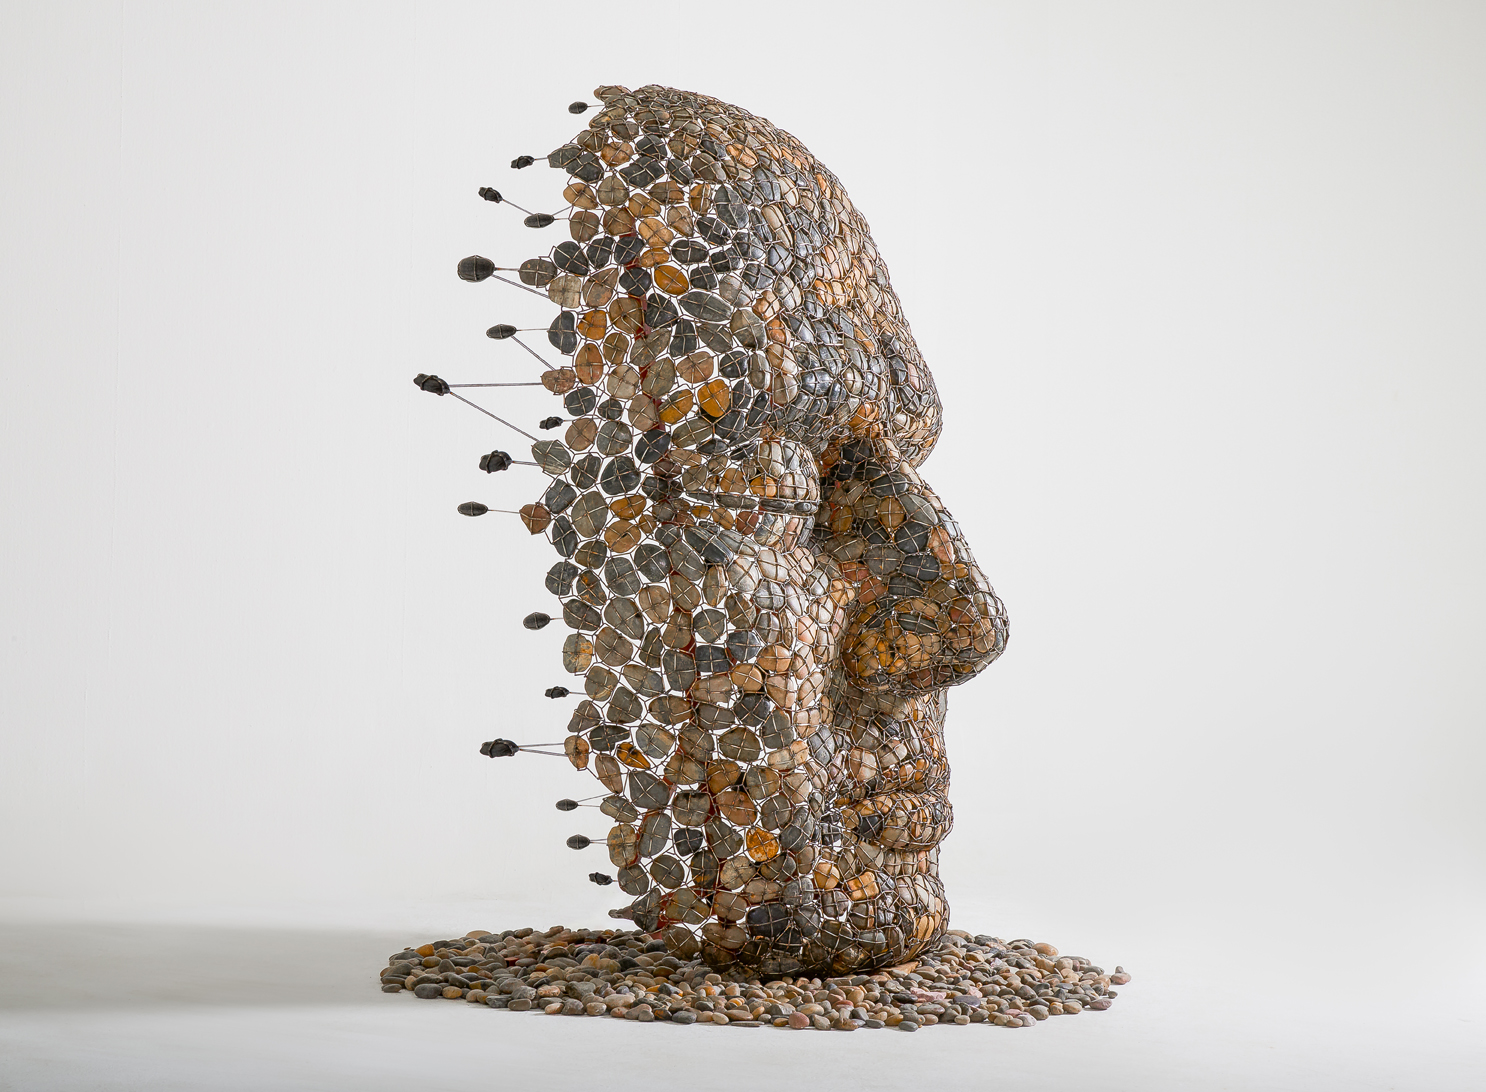 Enclose-Face 2019 140X100X210Cm stainless steel, stone 2019.jpg